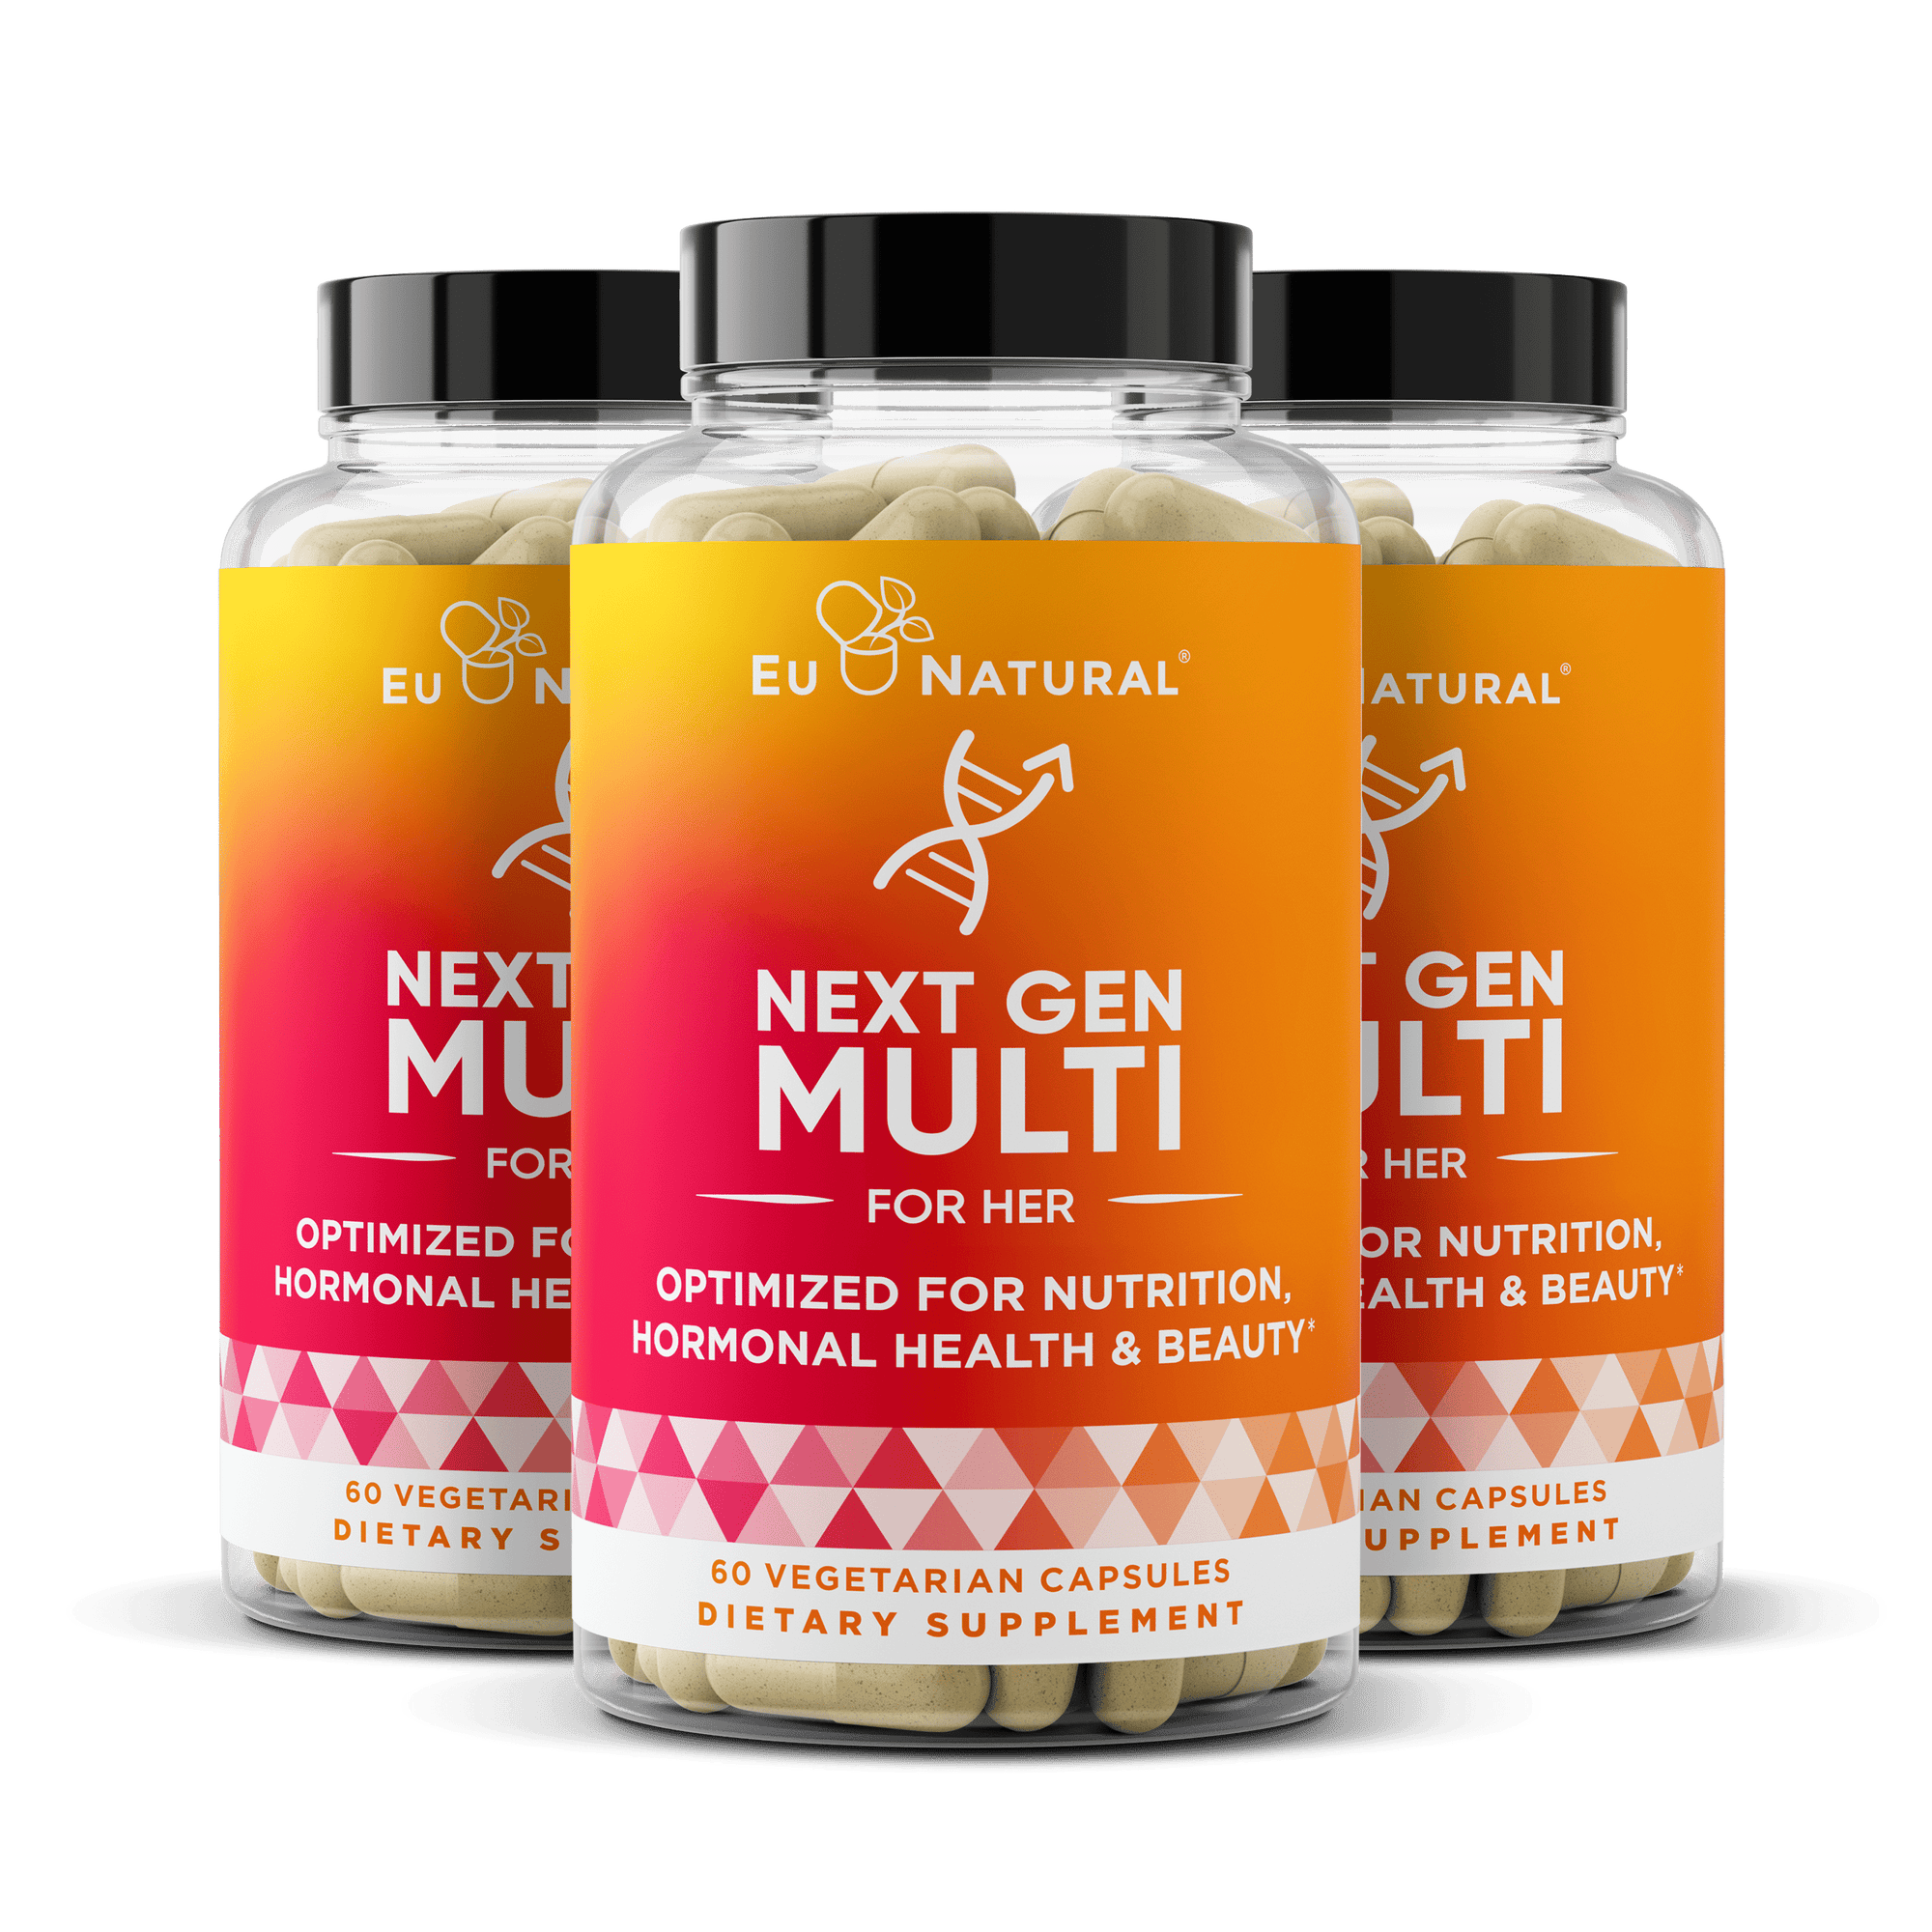 Eu Natural NEXT GEN FOR HER MULTIVITAMIN FOR WOMEN 3 PACK (formally known as ESSENTIALS, packaging may vary)